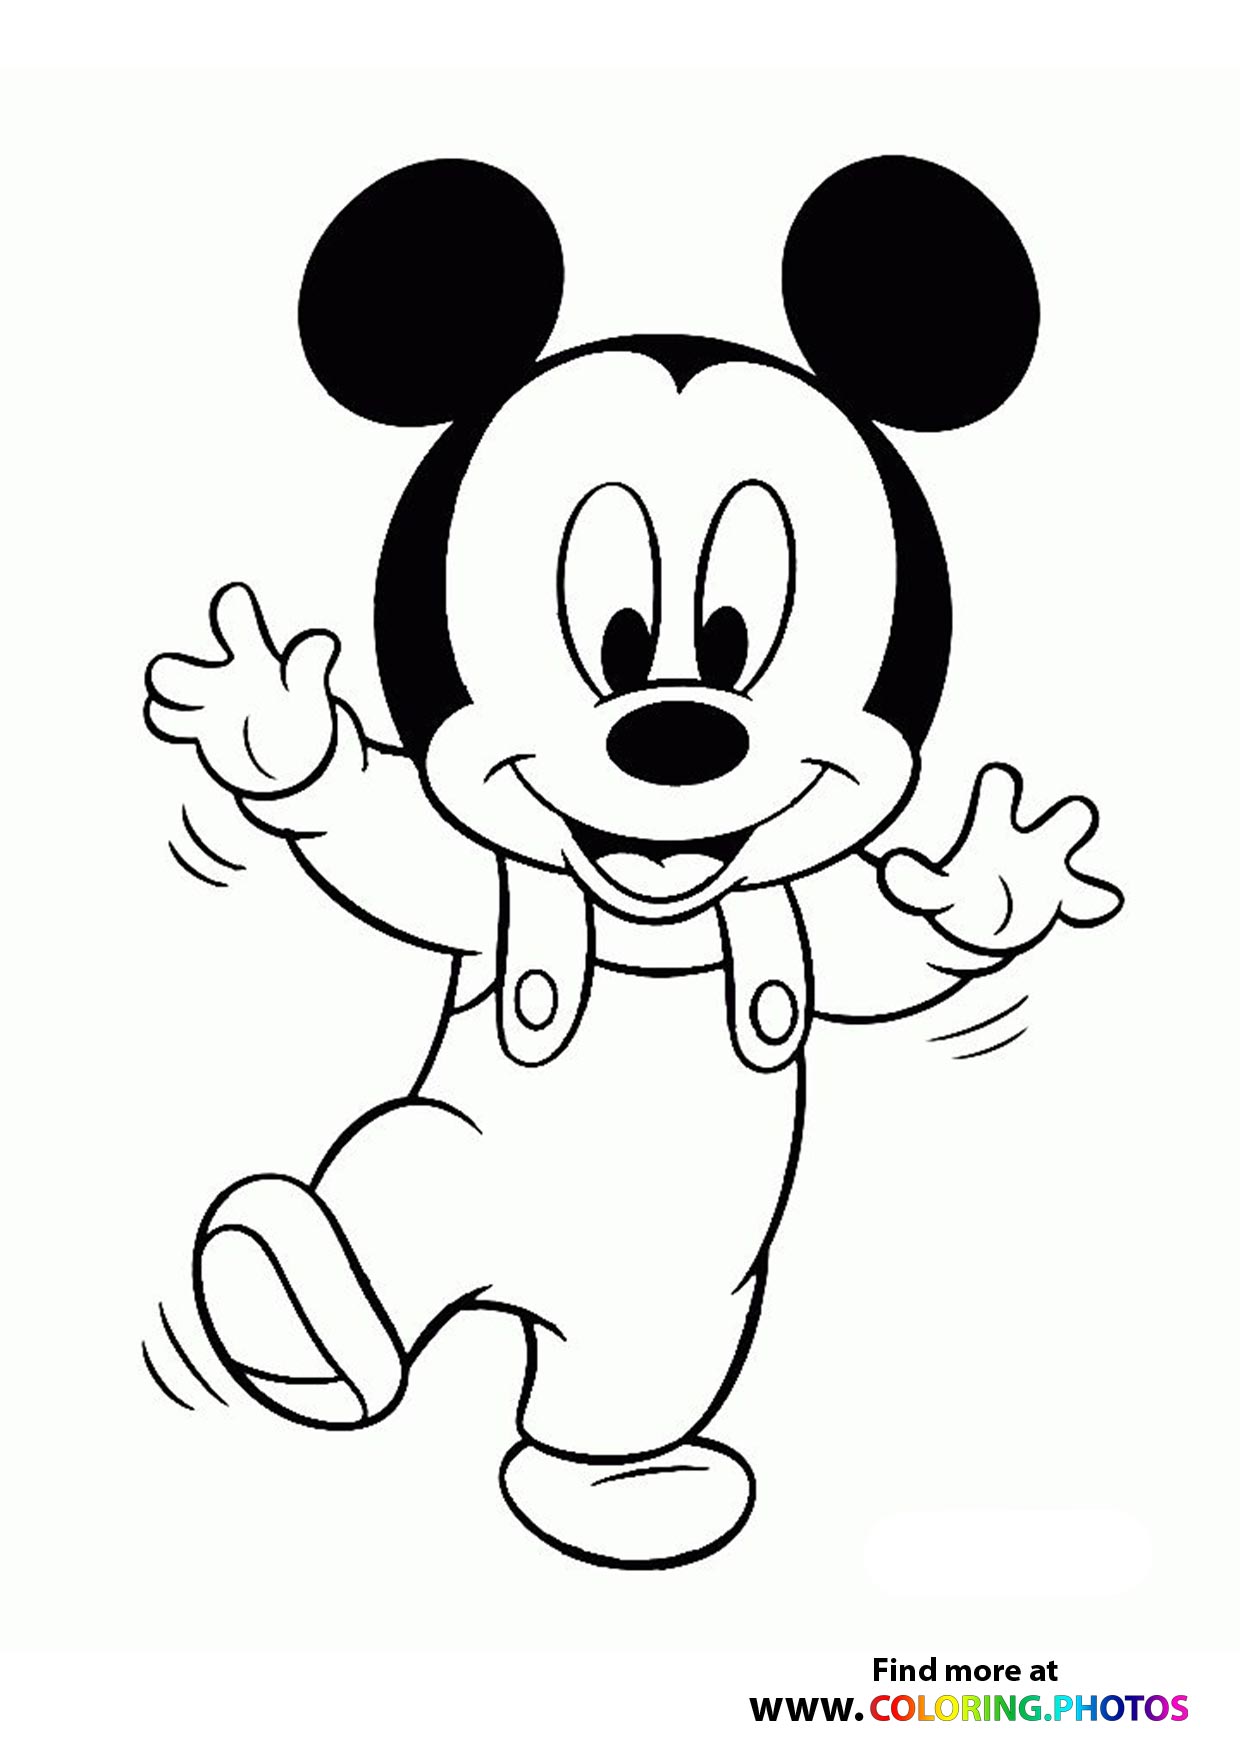 Bild von Mickey-mouse-baby-coloring-page-1